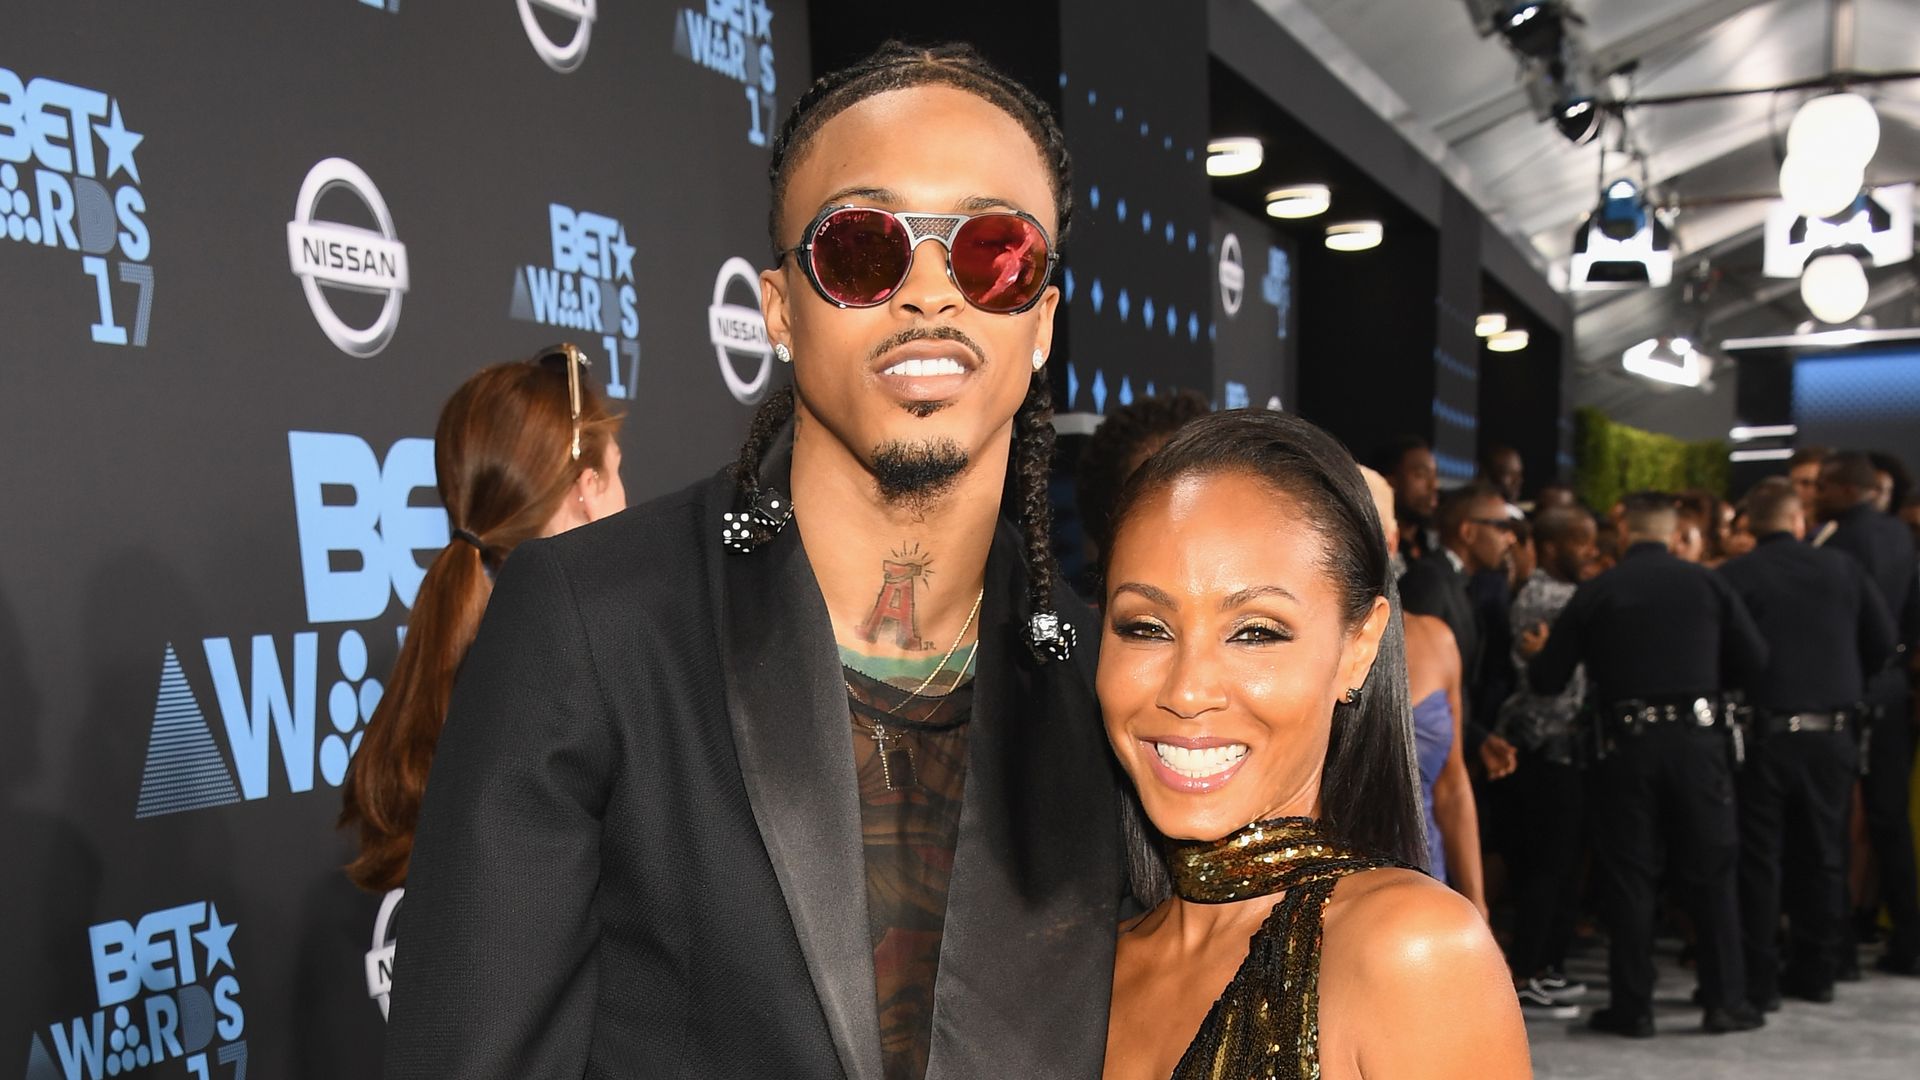 August Alsina and Jada Pinkett Smith at the 2017 BET Awards at Staples Center on June 25, 2017 in Los Angeles, California.